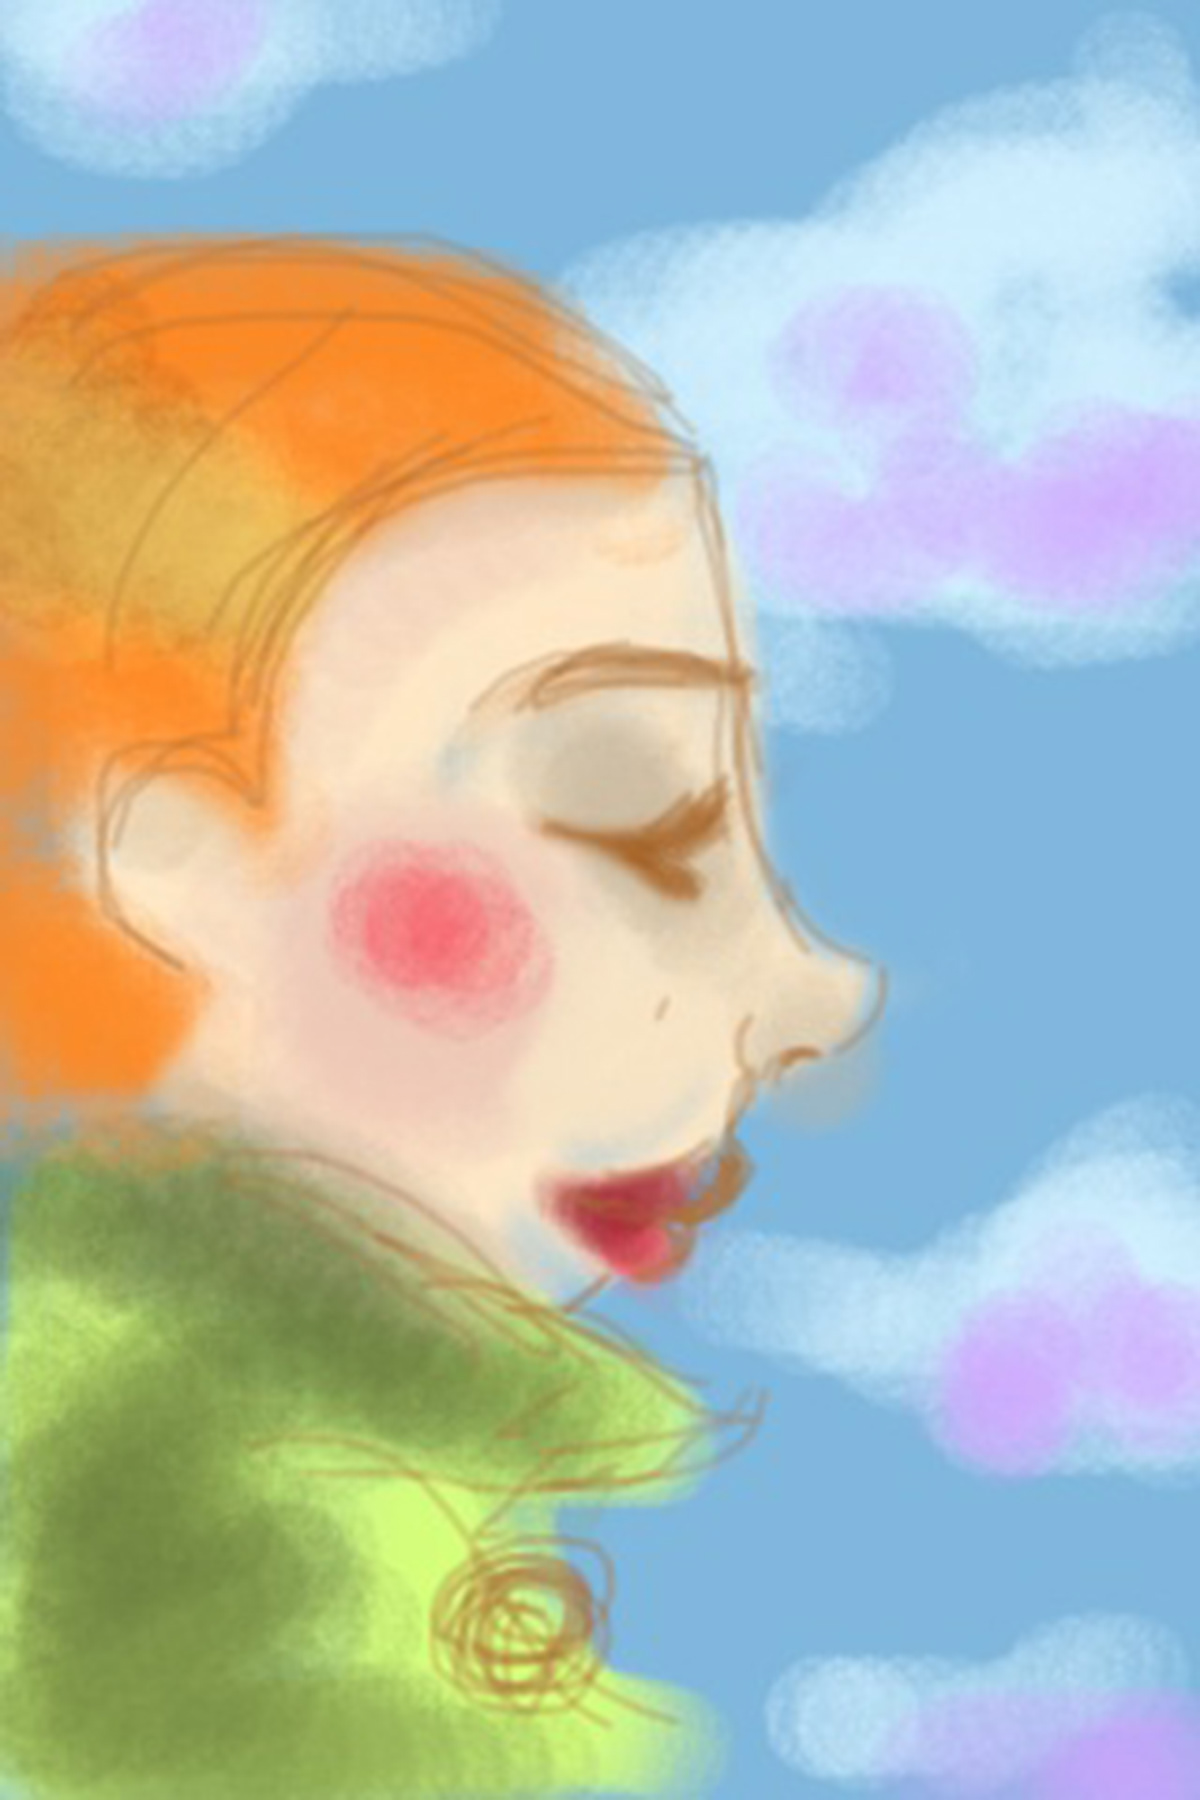 drawn with the Iphone App Brushes